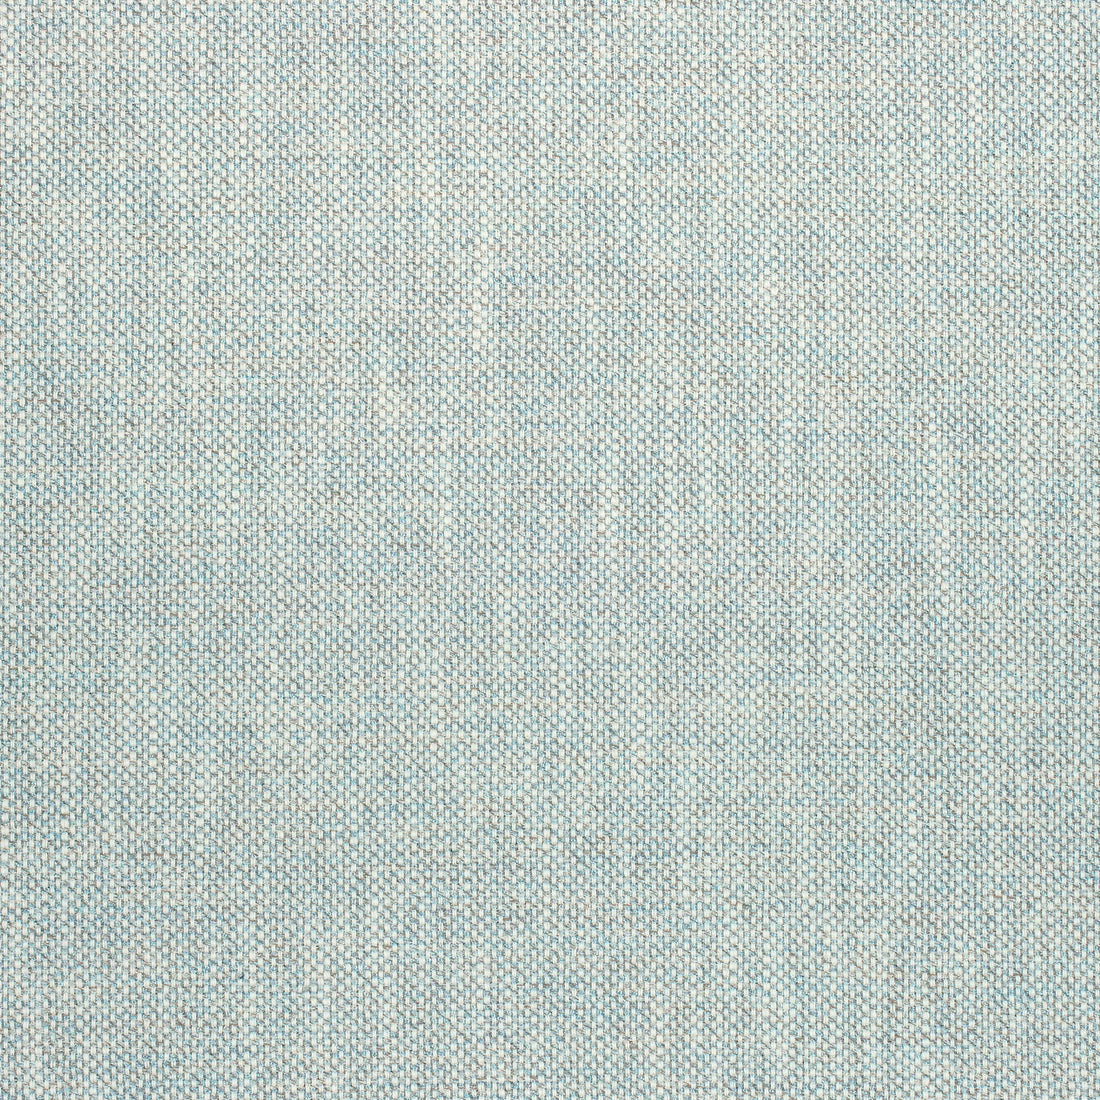 Wellfleet fabric in aqua color - pattern number W73425 - by Thibaut in the Landmark Textures collection